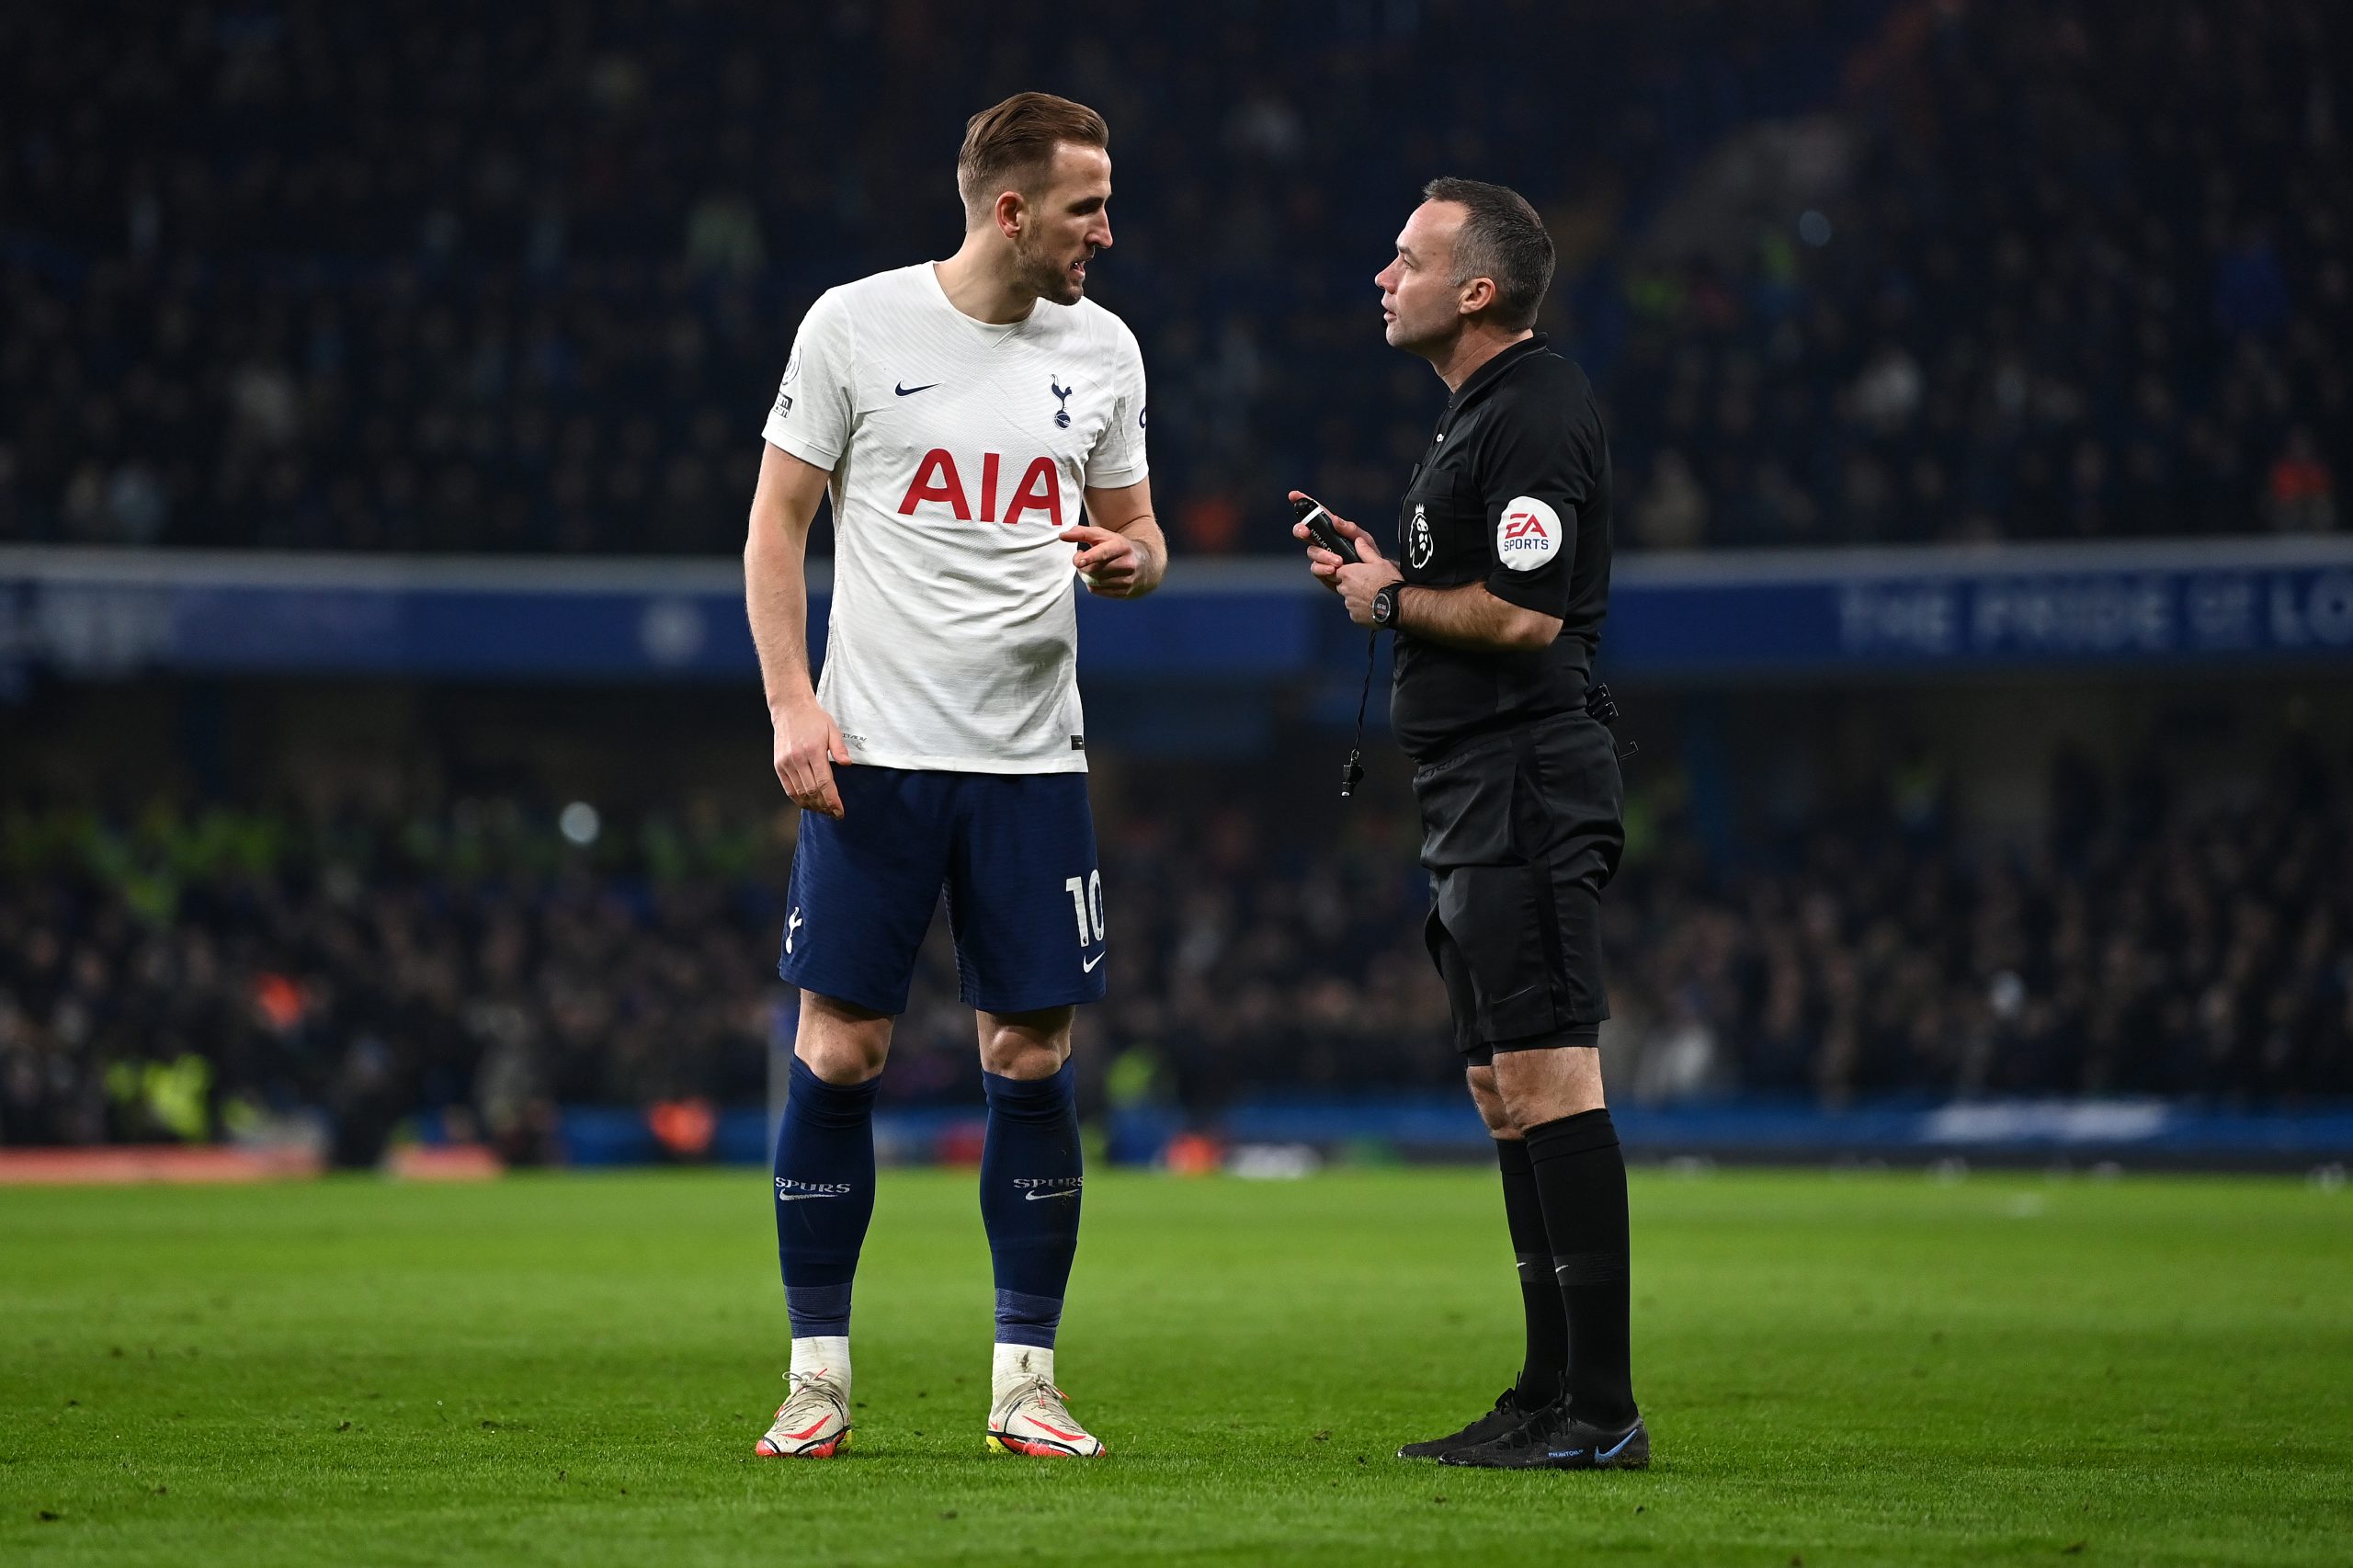 LONDON, ENGLAND - JANUARY 23: Harry Kane of Tottenham Hotspur speaks with referee, Paul Tierney during the Premier League match between Chelsea and Tottenham Hotspur at Stamford Bridge on January 23, 2022 in London, England. (Photo by Shaun Botterill/Getty Images)The 4th Official uses images provided by the following image agency: Getty Images (https://www.gettyimages.de/) Imago Images (https://www.imago-images.de/)